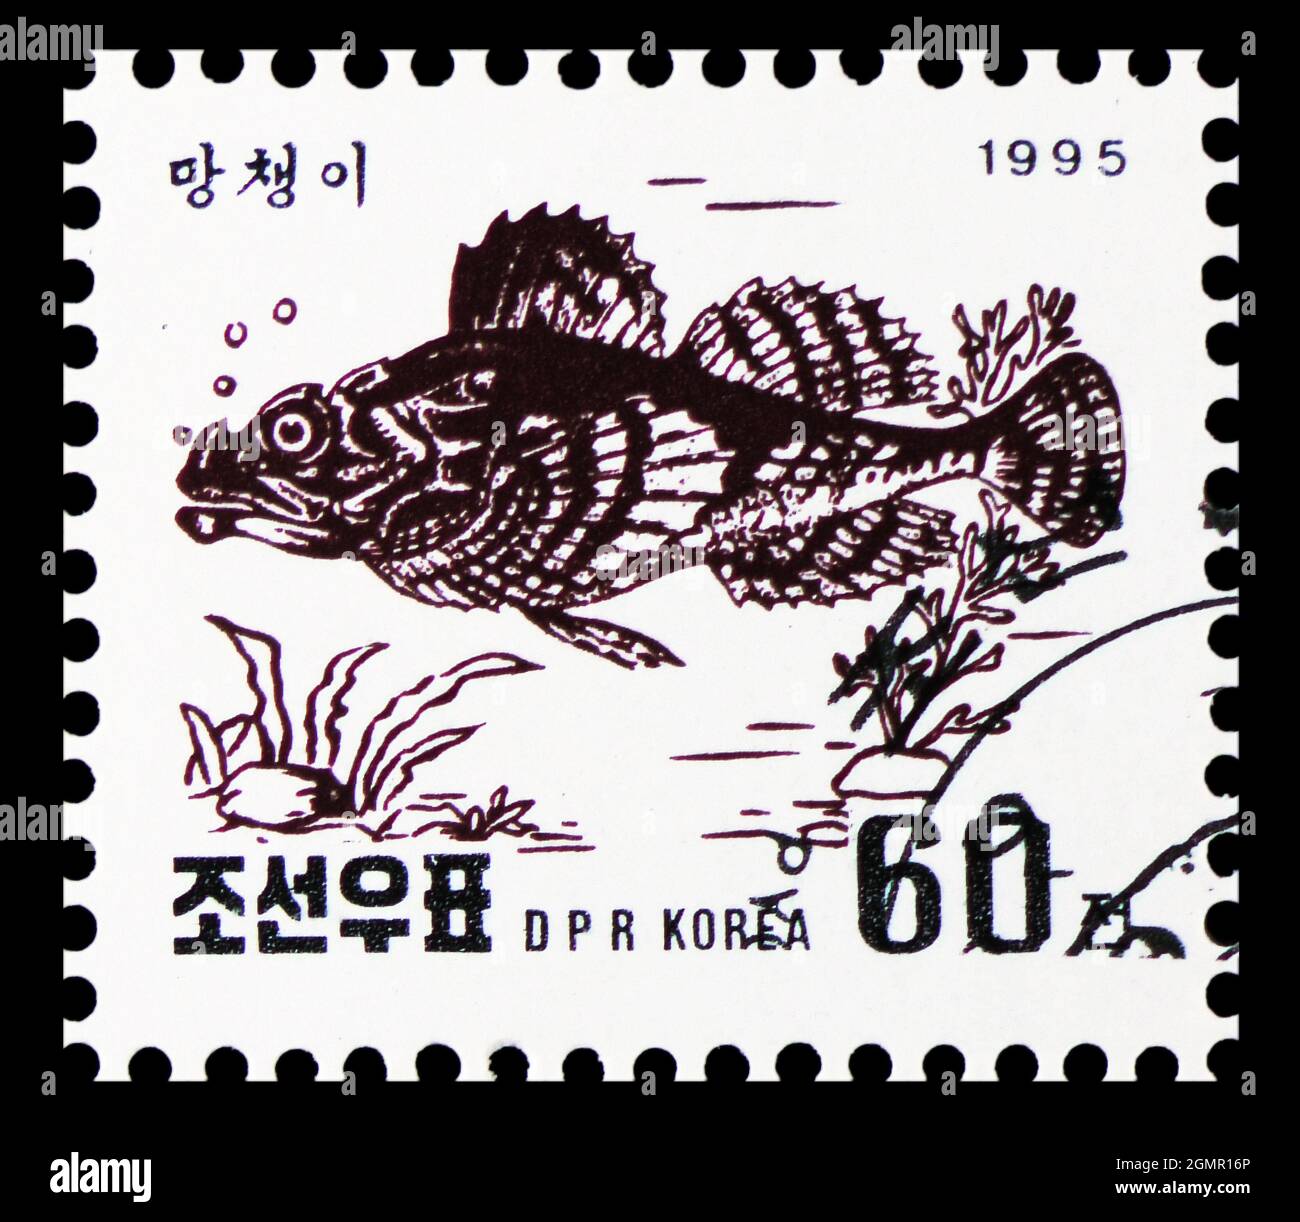 MOSCOW, RUSSIA - JULY 31, 2021: Postage stamp printed in Korea shows Shorthorn Sculpin (Myoxocephalus scorpius), Fishes of the Eastern Sea serie, circ Stock Photo